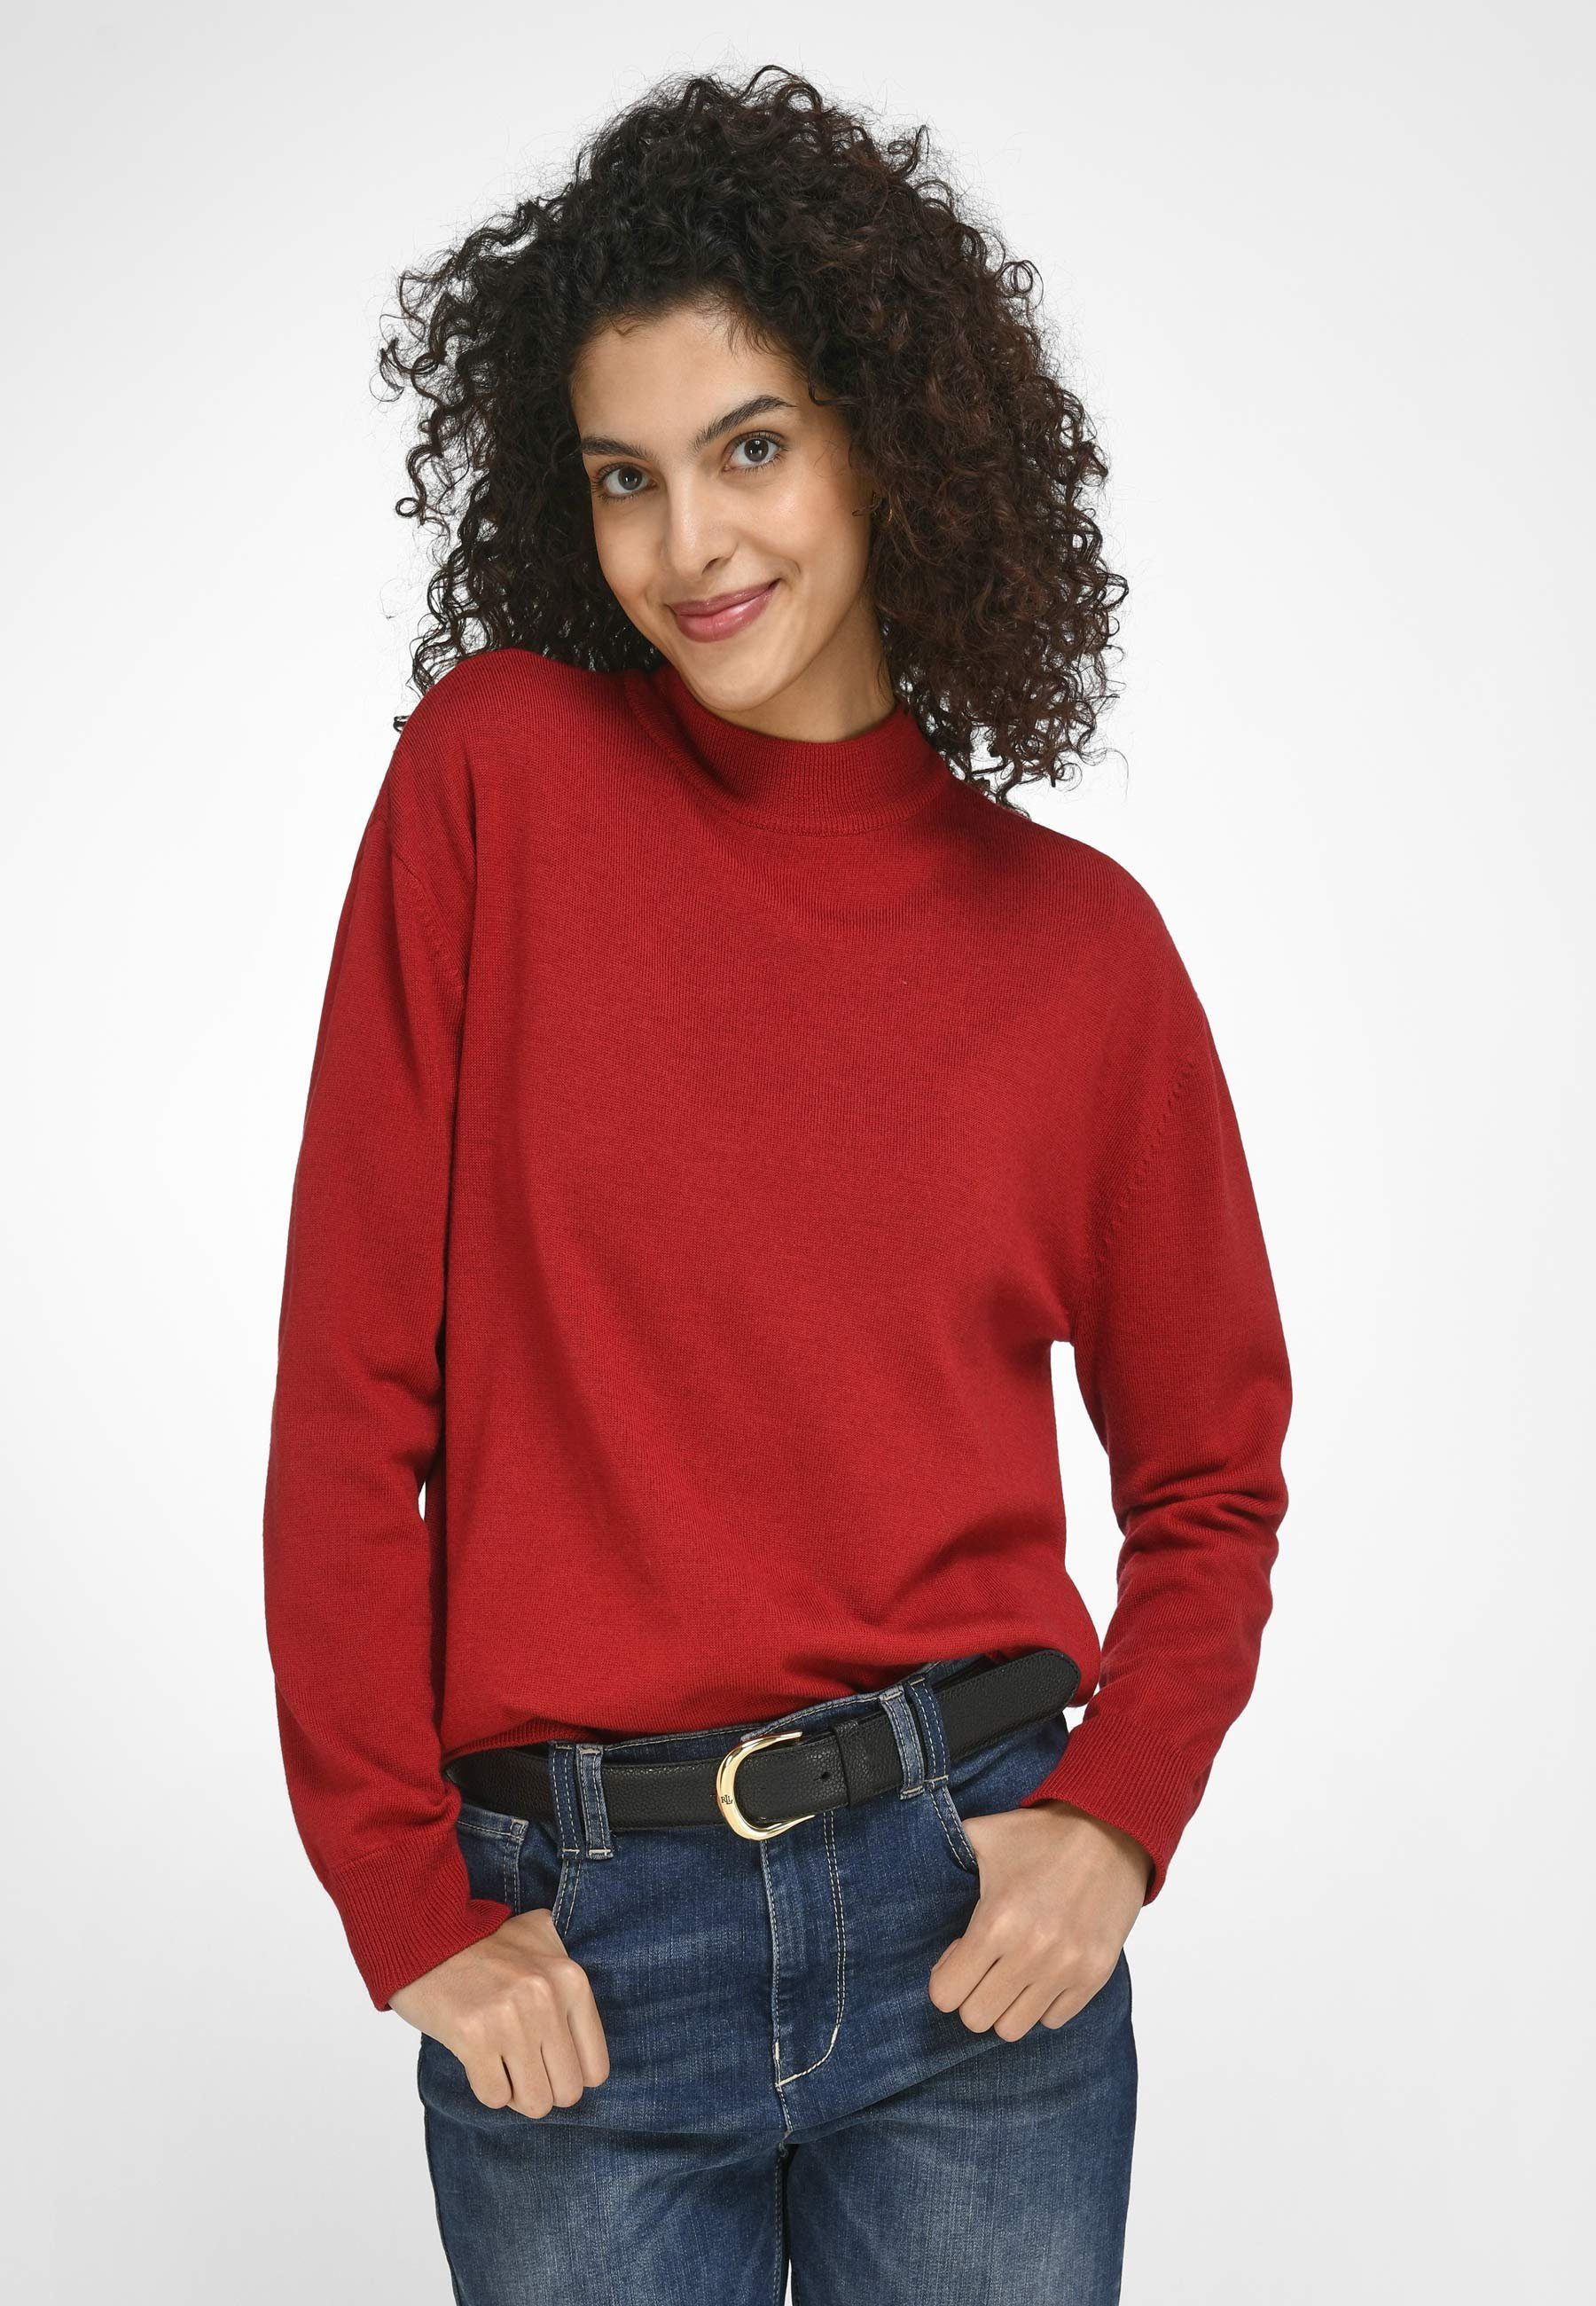 new Peter Hahn ROT wool Strickpullover